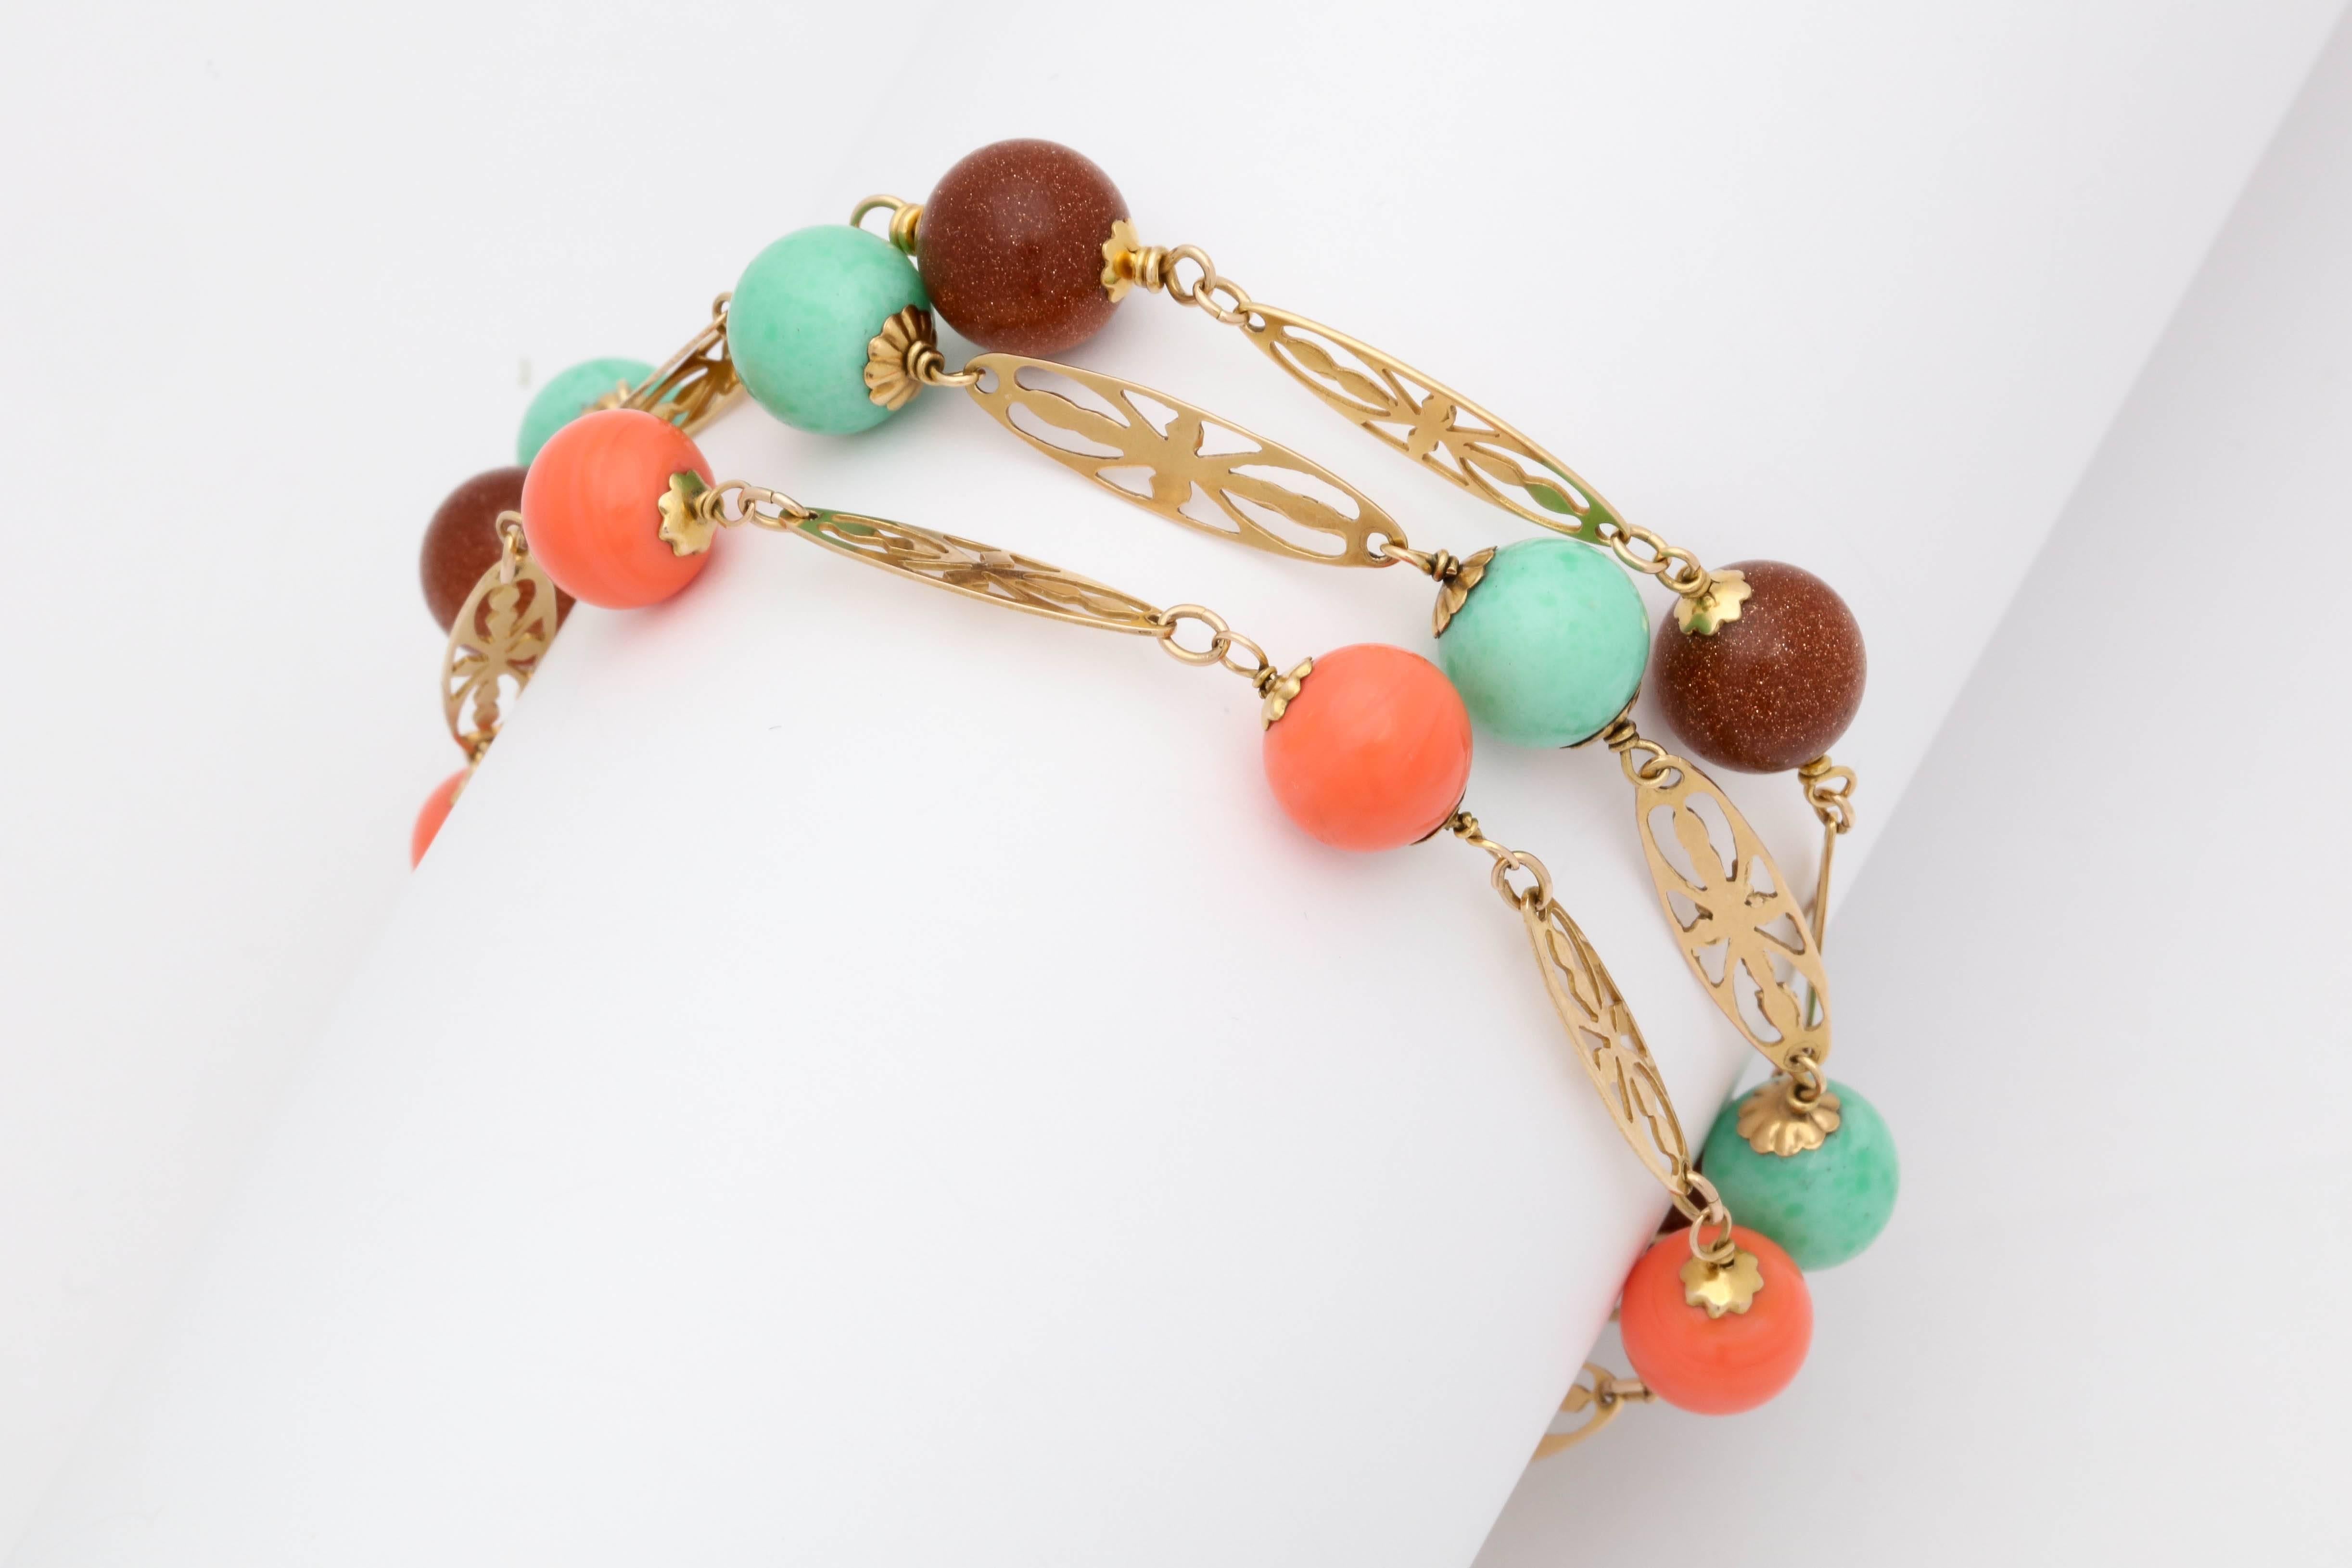 A Triple Pair Of 14kt Reticulated Cut Out Flower Gold Bracelets Each Designed With Three Different Semi Precious Stones Consisting Of Five Coral Bead Stones And With Six Turquoise Bead Stones And Finally with Five Gold Stone Beads.Very Nicely Worn